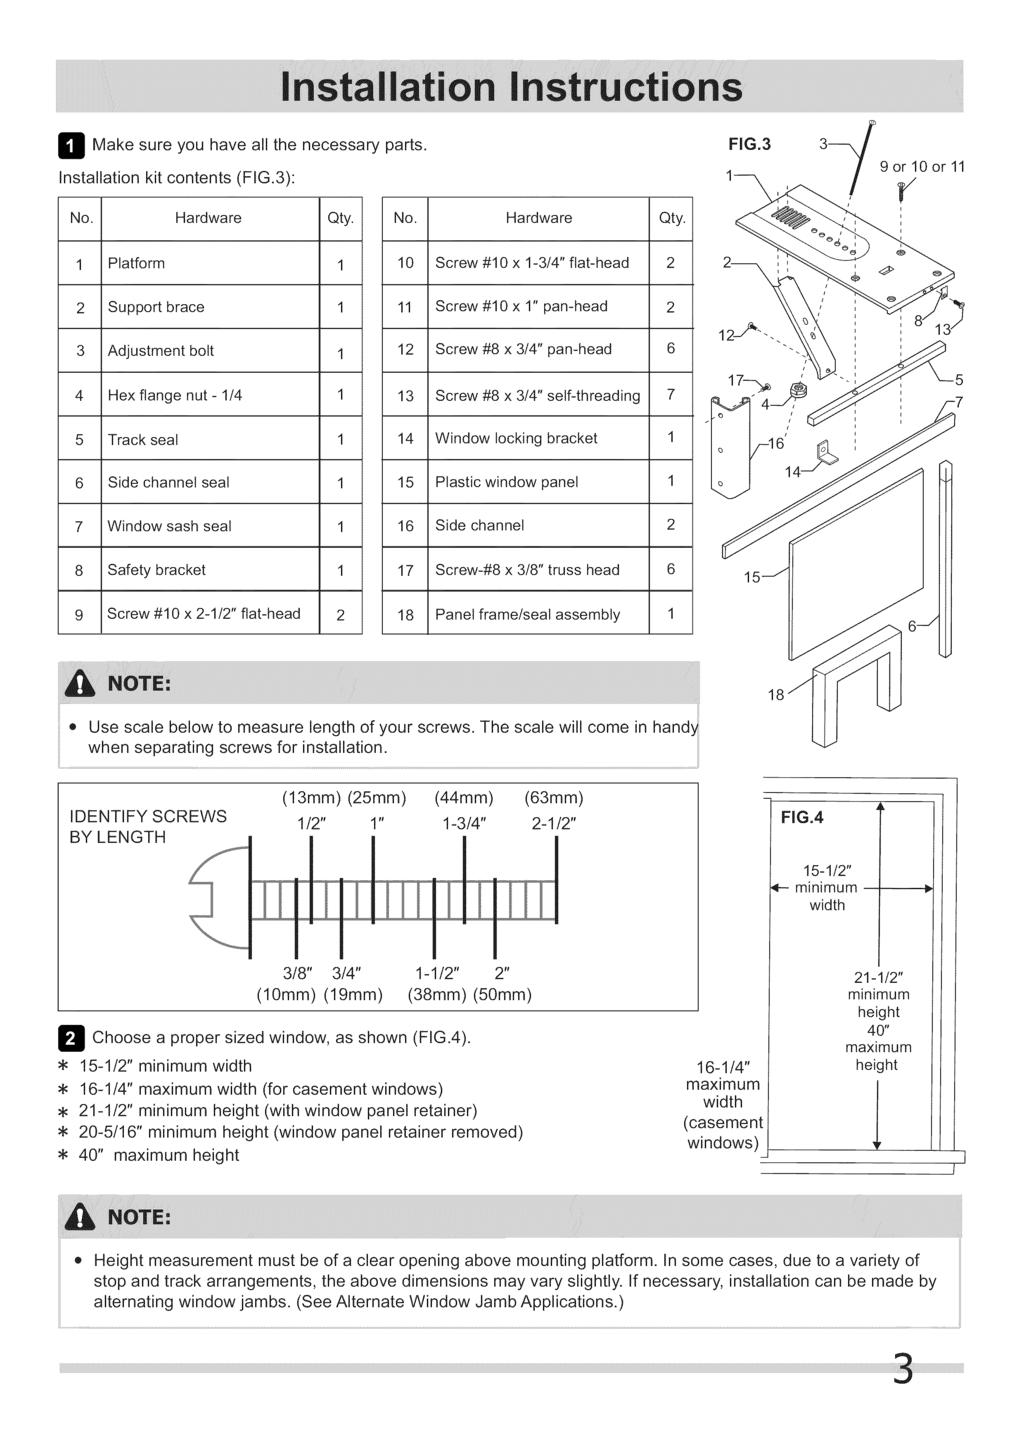 II!1 Make sure you have all the necessary parts. Installation kit contents (FIG.3): FIG.3 9 or 10or 11 No. Hardware Qty.